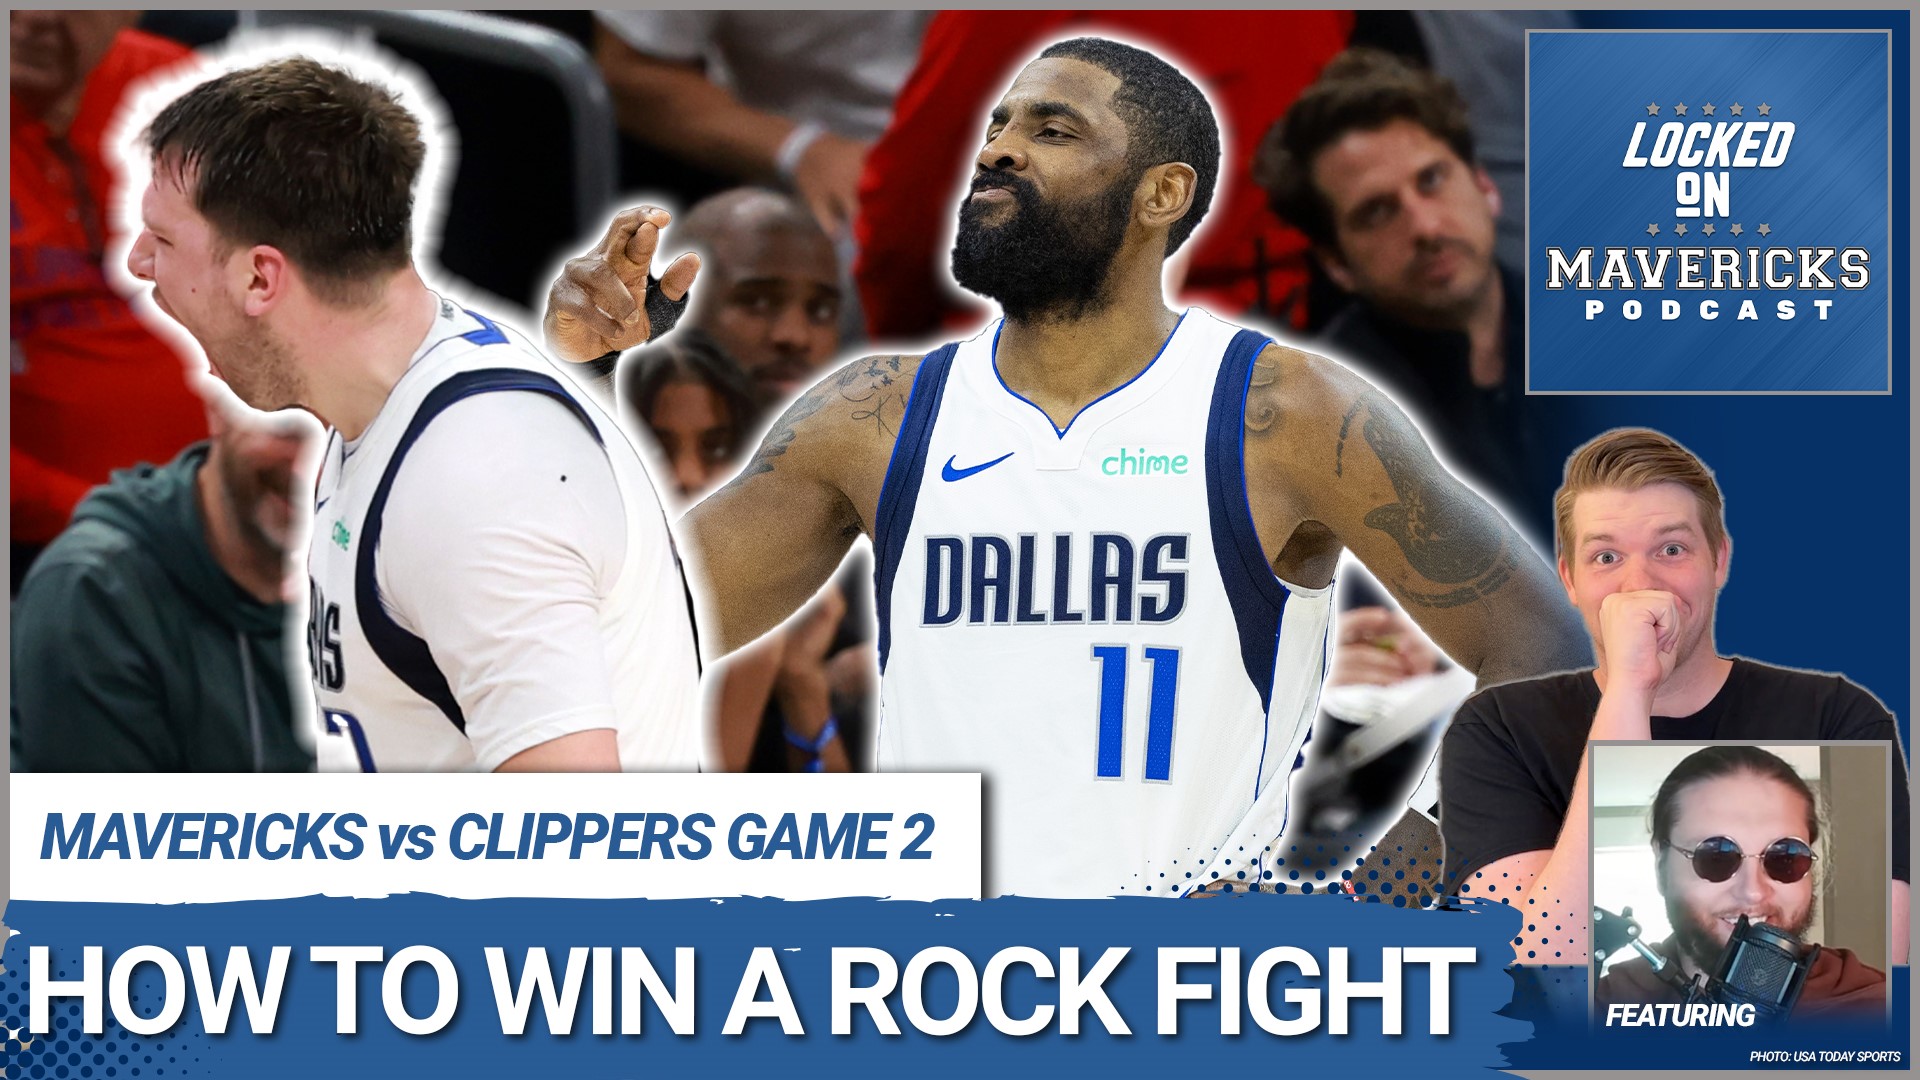 Nick Angstadt & Slightly Biased breakdown how the Dallas Mavericks beat the Los Angeles Clippers, Luka Doncic & Kyrie Irving led the Mavs on both ends.